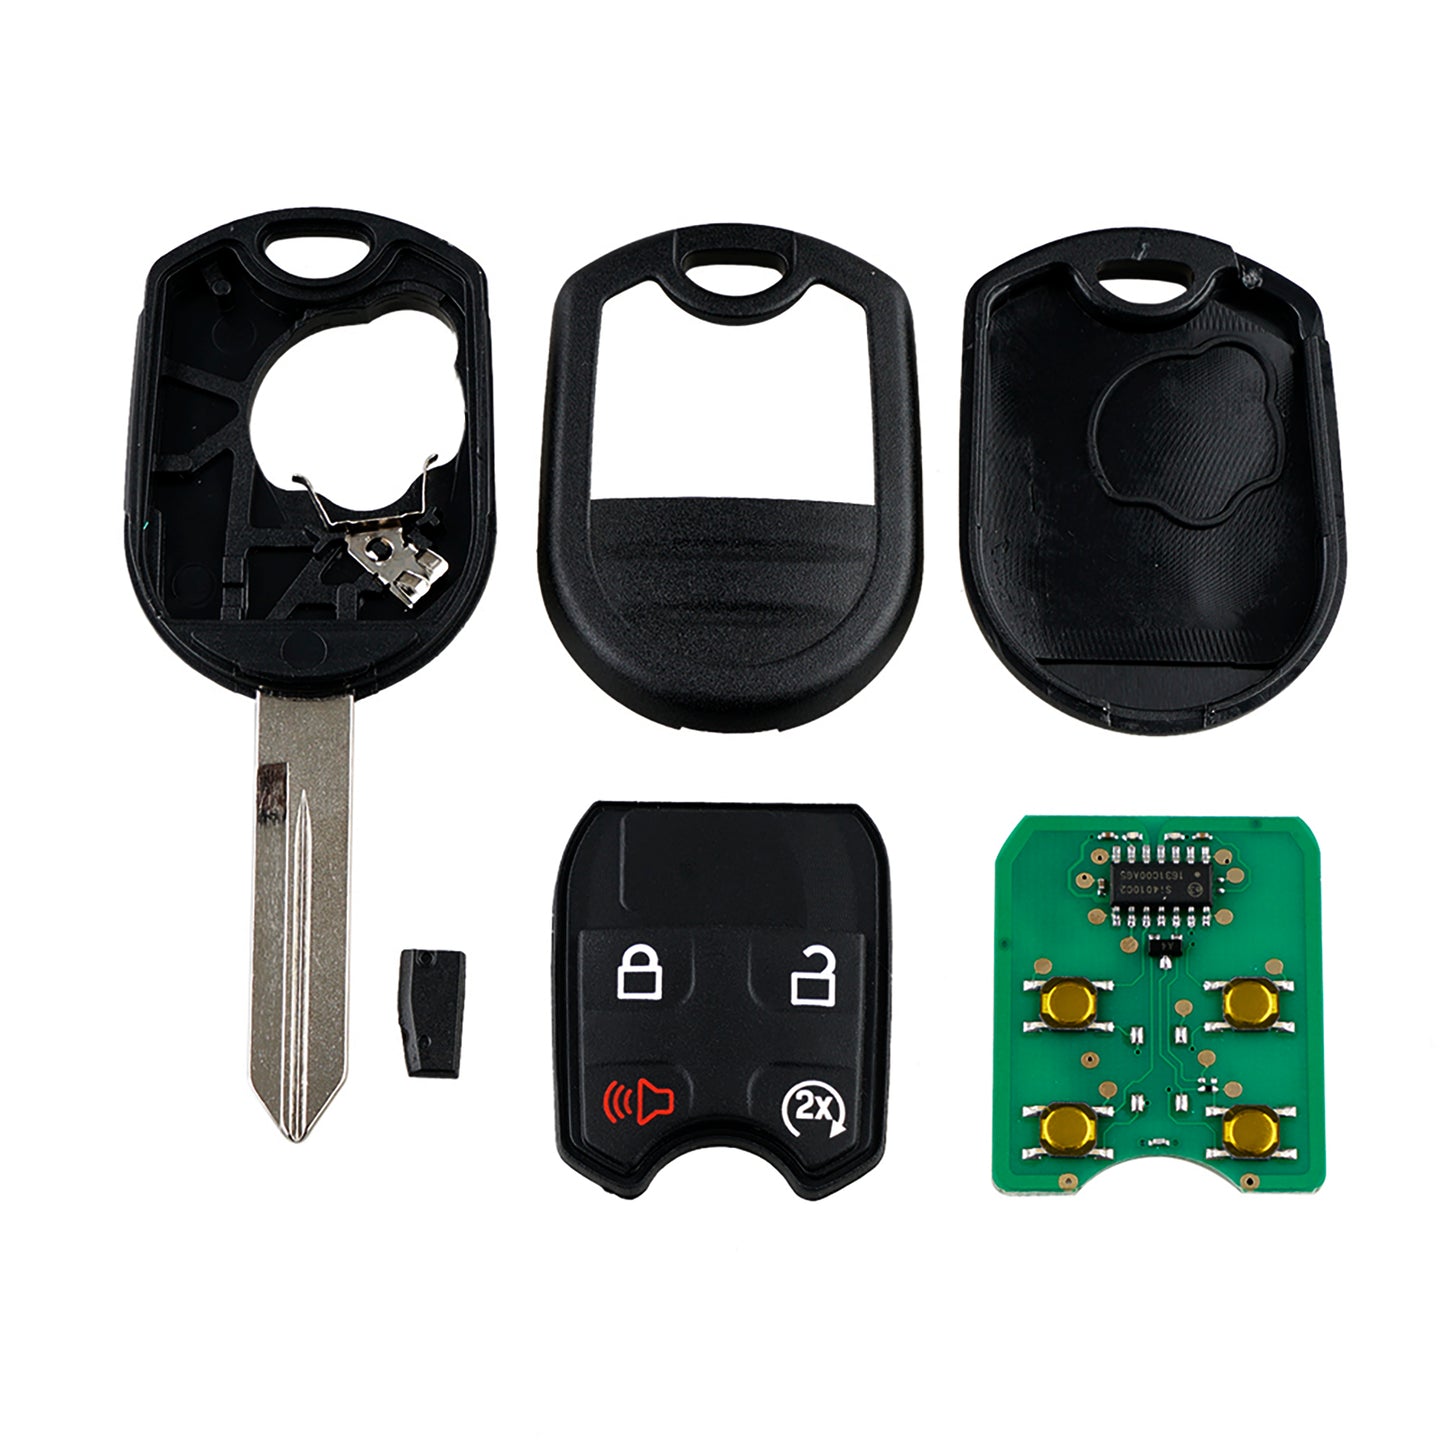 4 Buttons 315MHz Keyless Entry Fob Remote Car Key For 2007-2018 Ford Edge Escape Explorer Expedition Ford F150 250 350 450 550 650 750 Five Hundred Flex Focus Fusion Mustang Ranger Taurus FCC ID: OUC6000022 CWTWB1U793SKU : J041